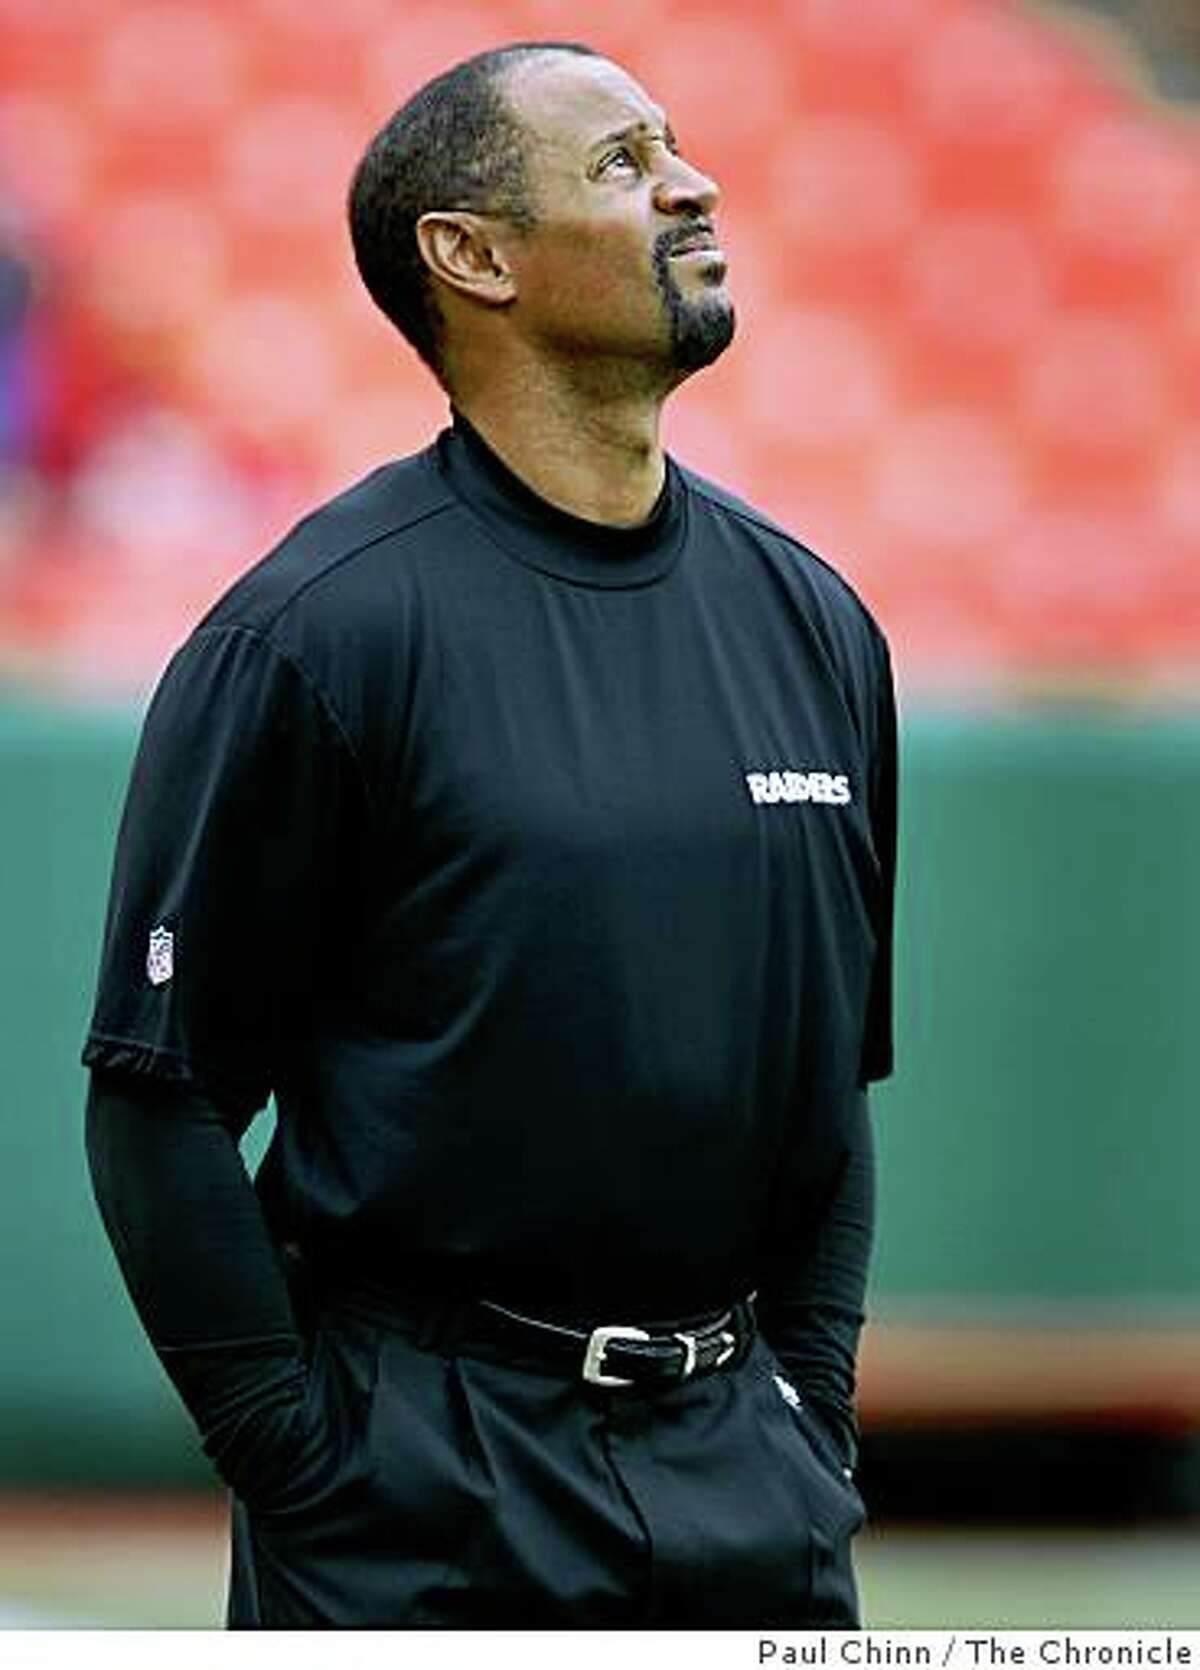 Wide receivers coach James Lofton watches pre-game warmups before the Oakland Raiders vs. Kansas City Chiefs football game at Arrowhead Stadium in Kansas City, Mo., on Sunday, Sept. 14, 2008.